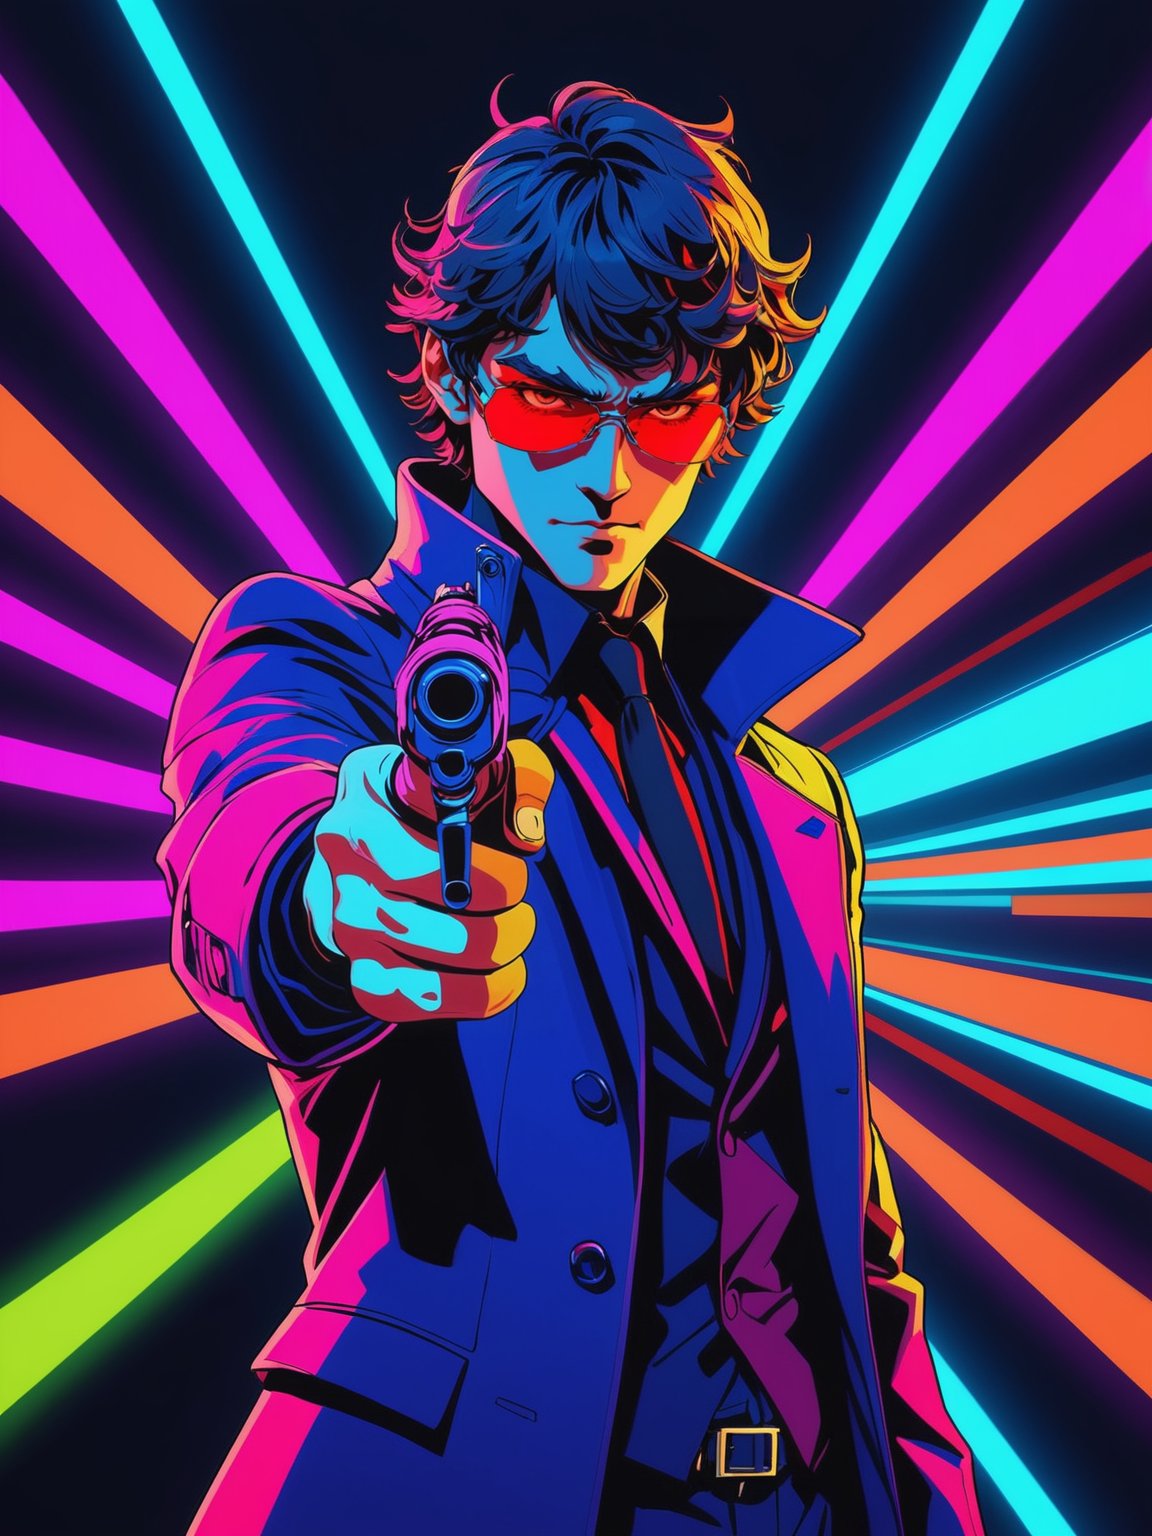 Persona V style, solo, one man pointing gun at viewer, highly detailed, quality, symmetrical, neon colors, 5 fingers only please, IT'S NOT FUCKING HARD